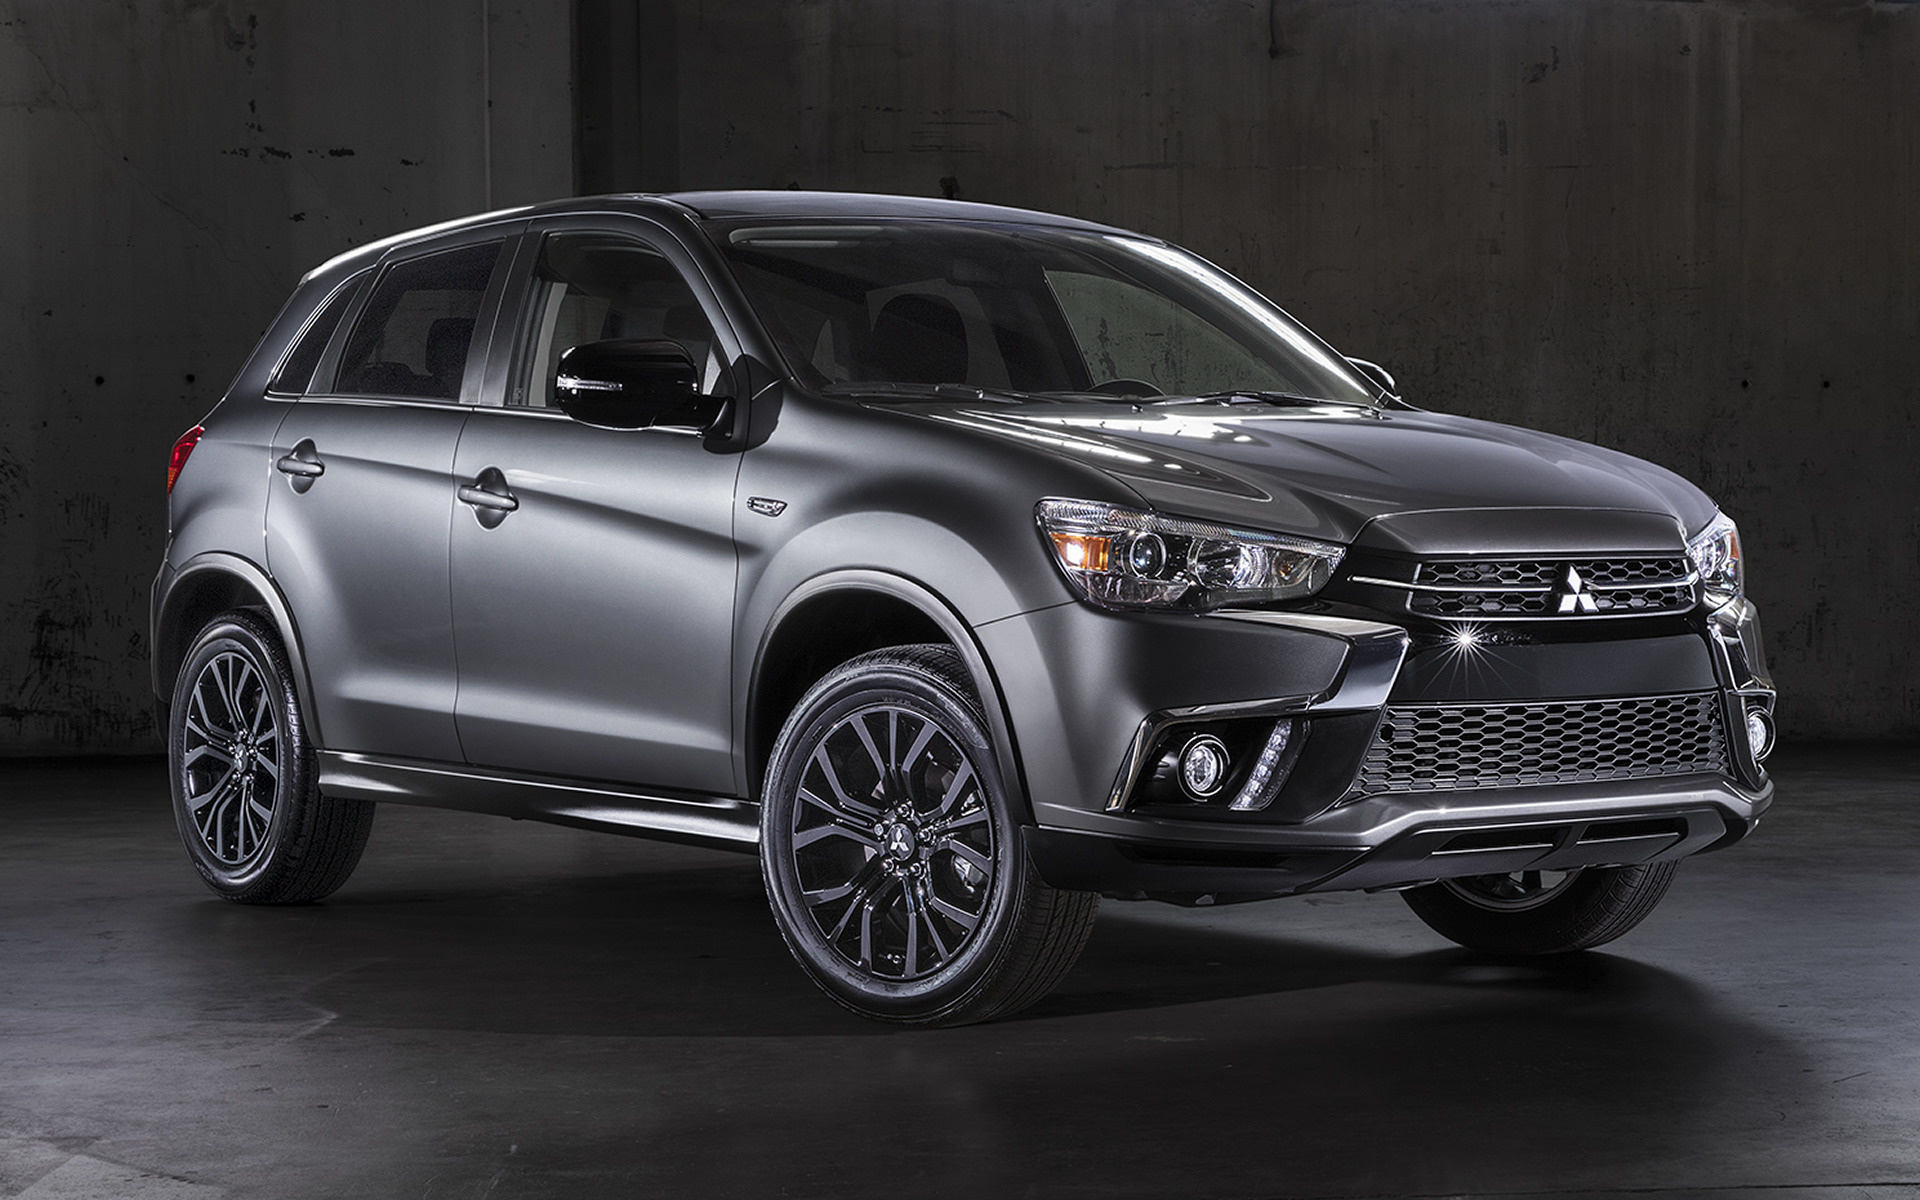 Mitsubishi Outlander Sport Limited Edition, Stylish and sporty, Exclusive design elements, Limited production, 1920x1200 HD Desktop